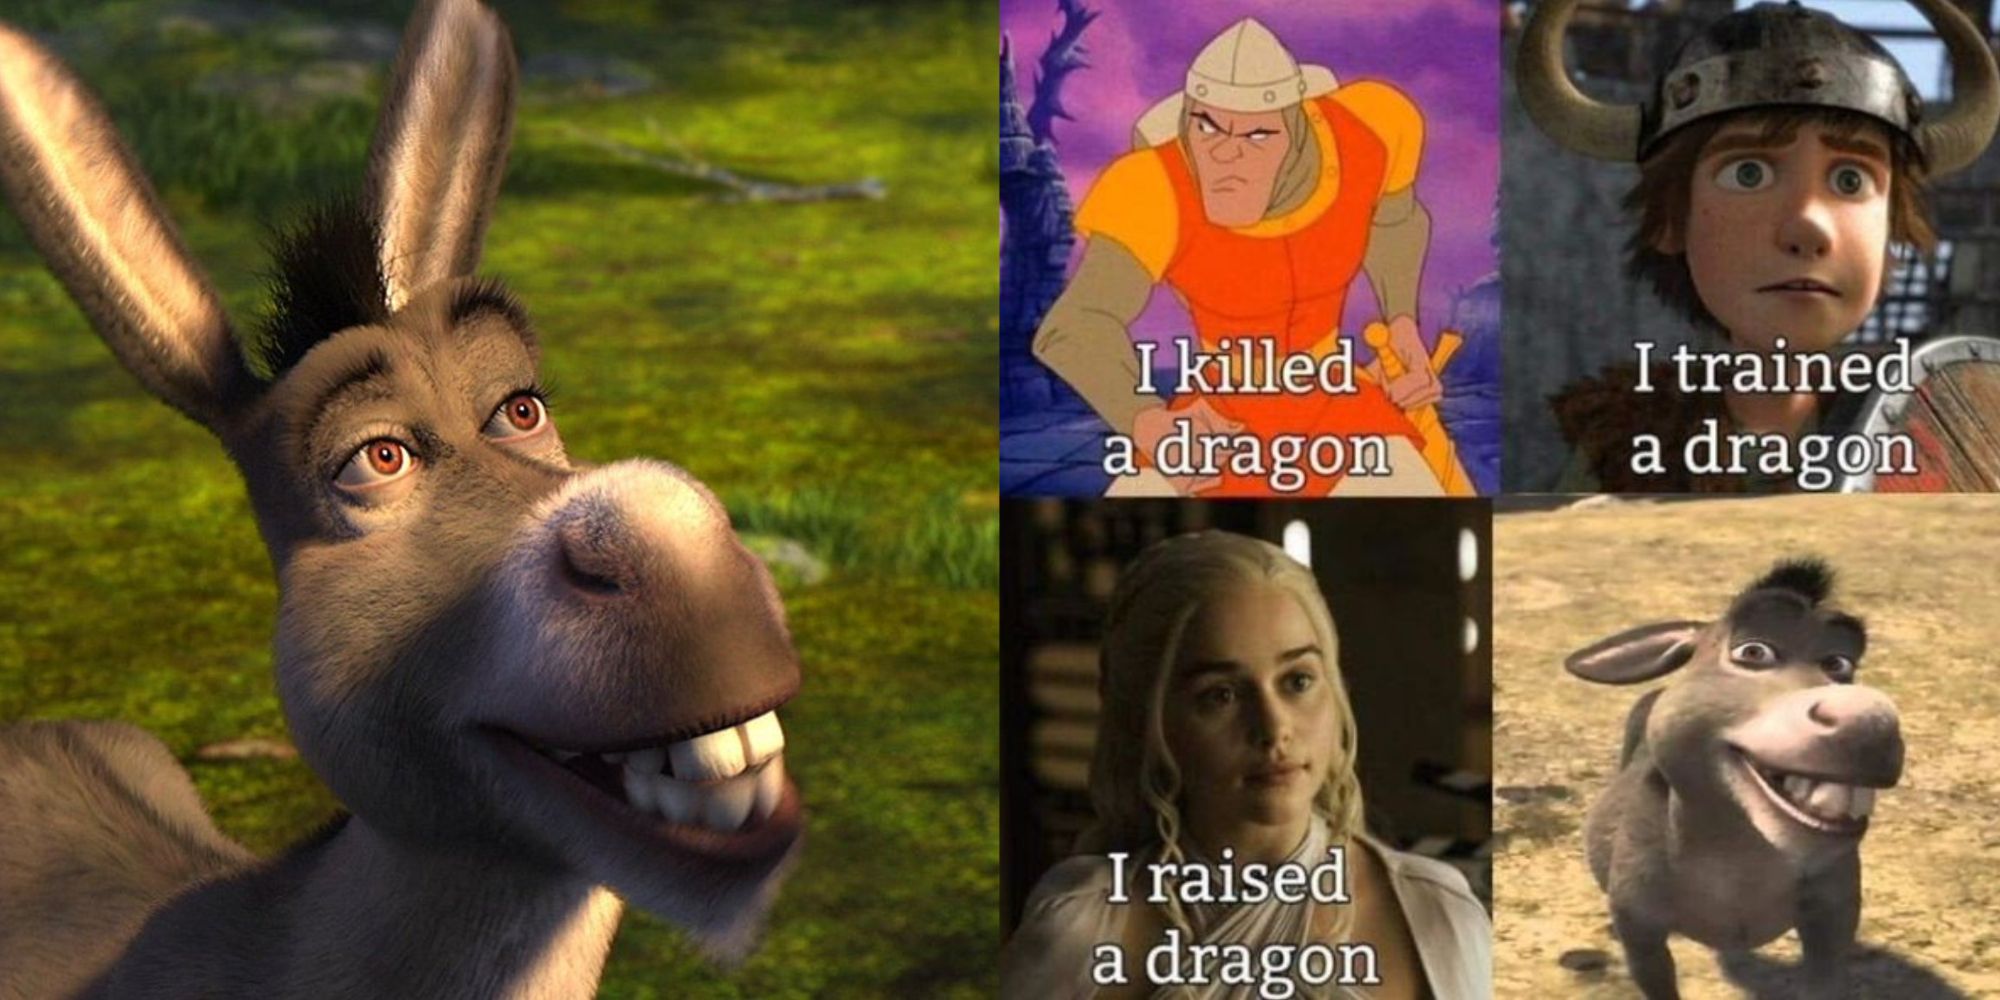 Split Image of Donkey from Shrek smiling and a meme about him and Dragon.